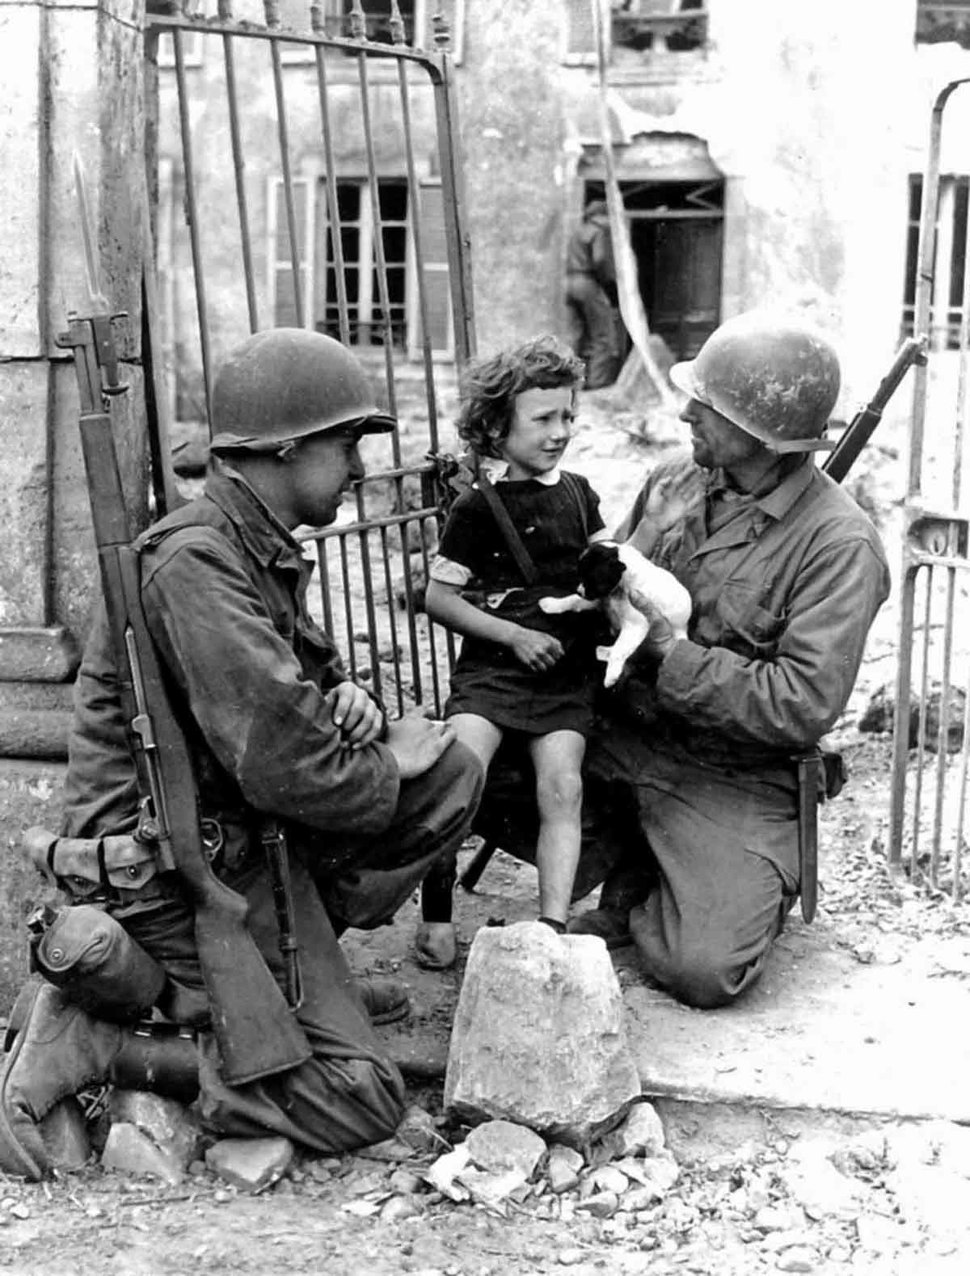 us soldiers ww2